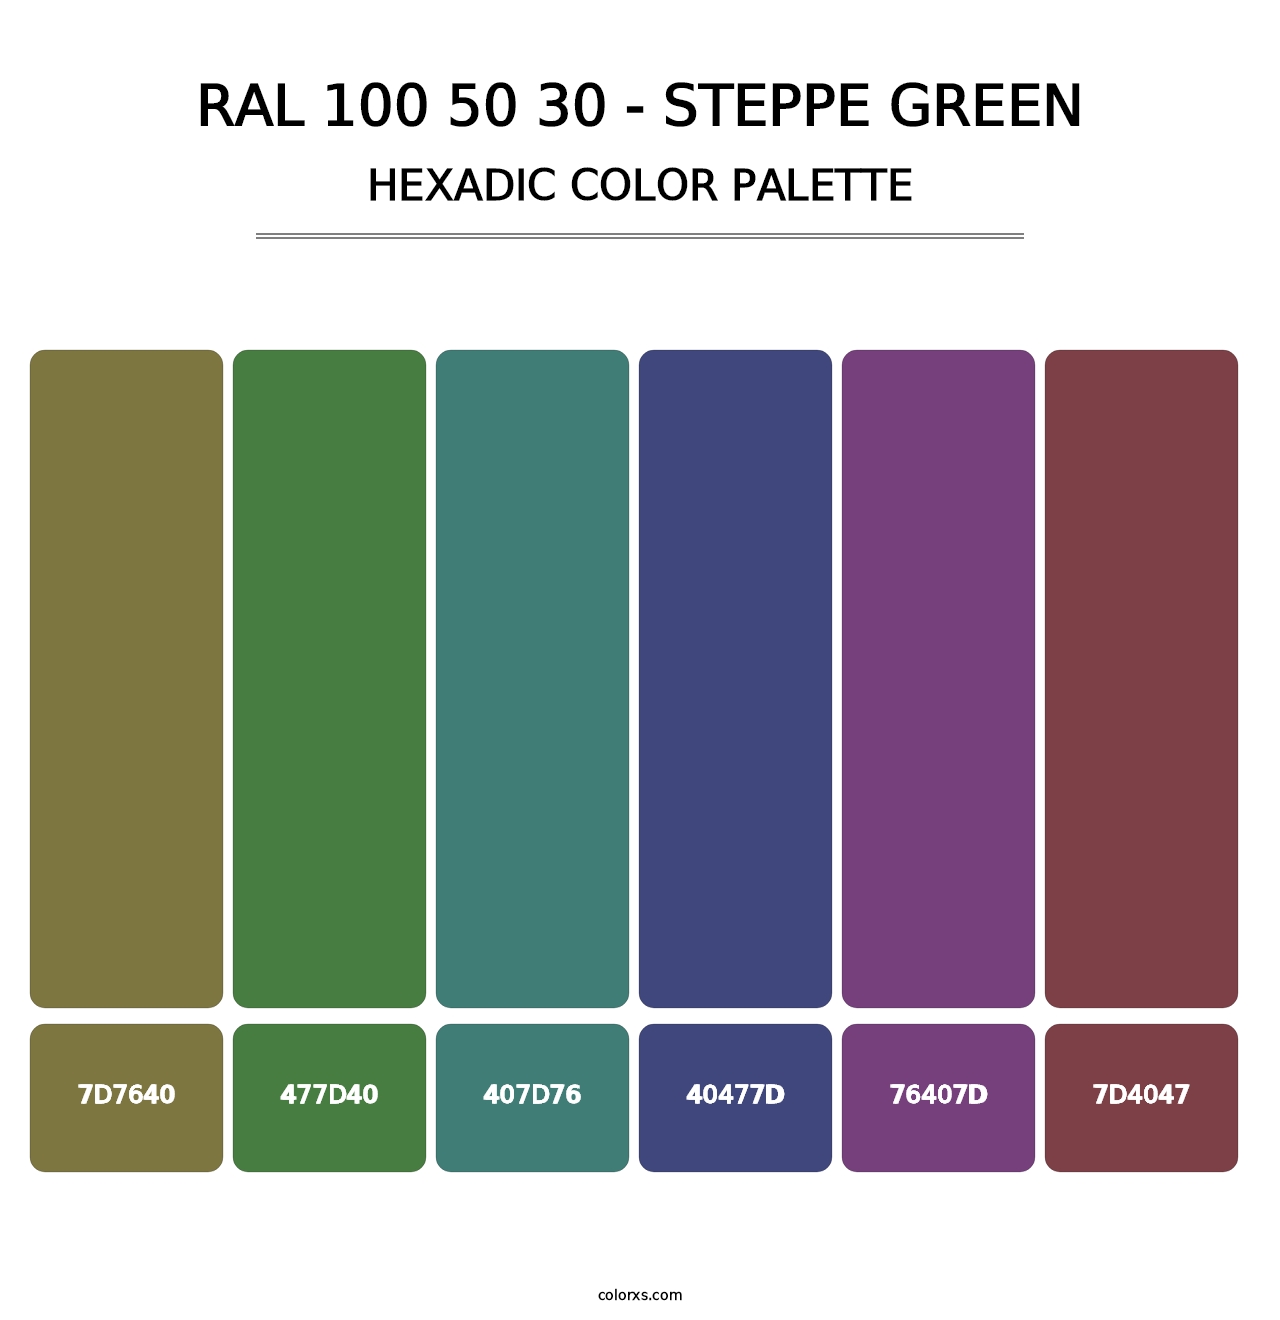 RAL 100 50 30 - Steppe Green - Hexadic Color Palette